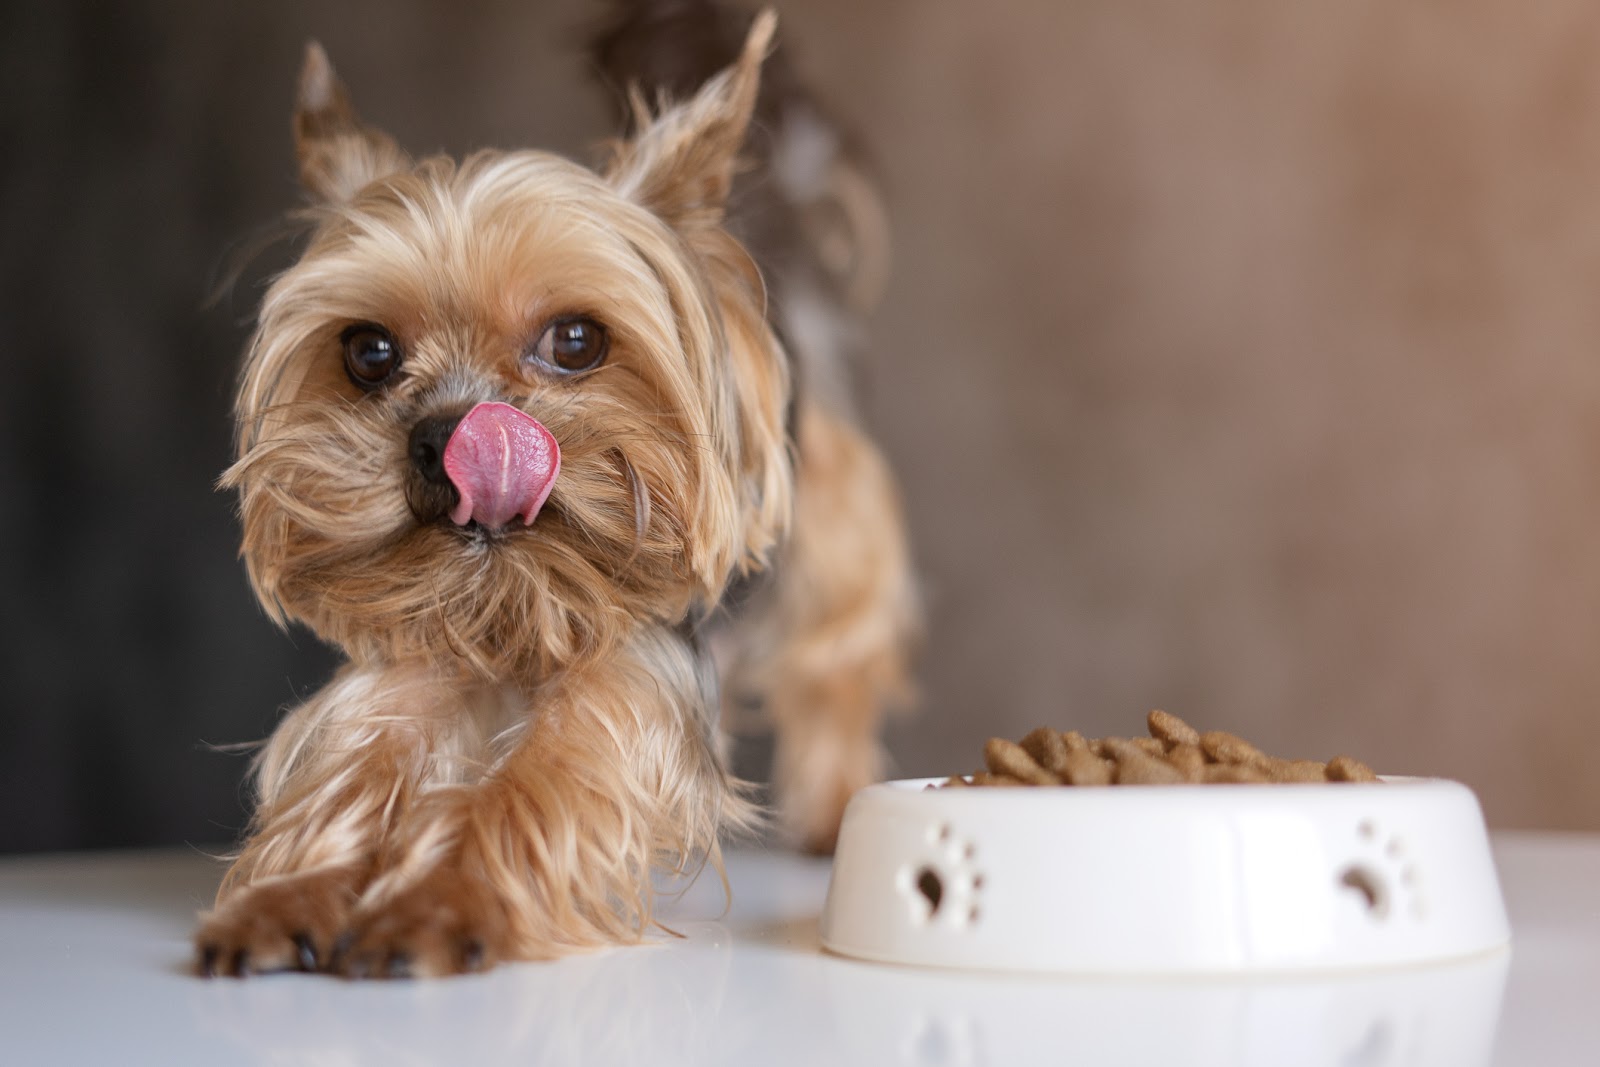 Dog Yorkshire Terrier with a bowl of food, eating food